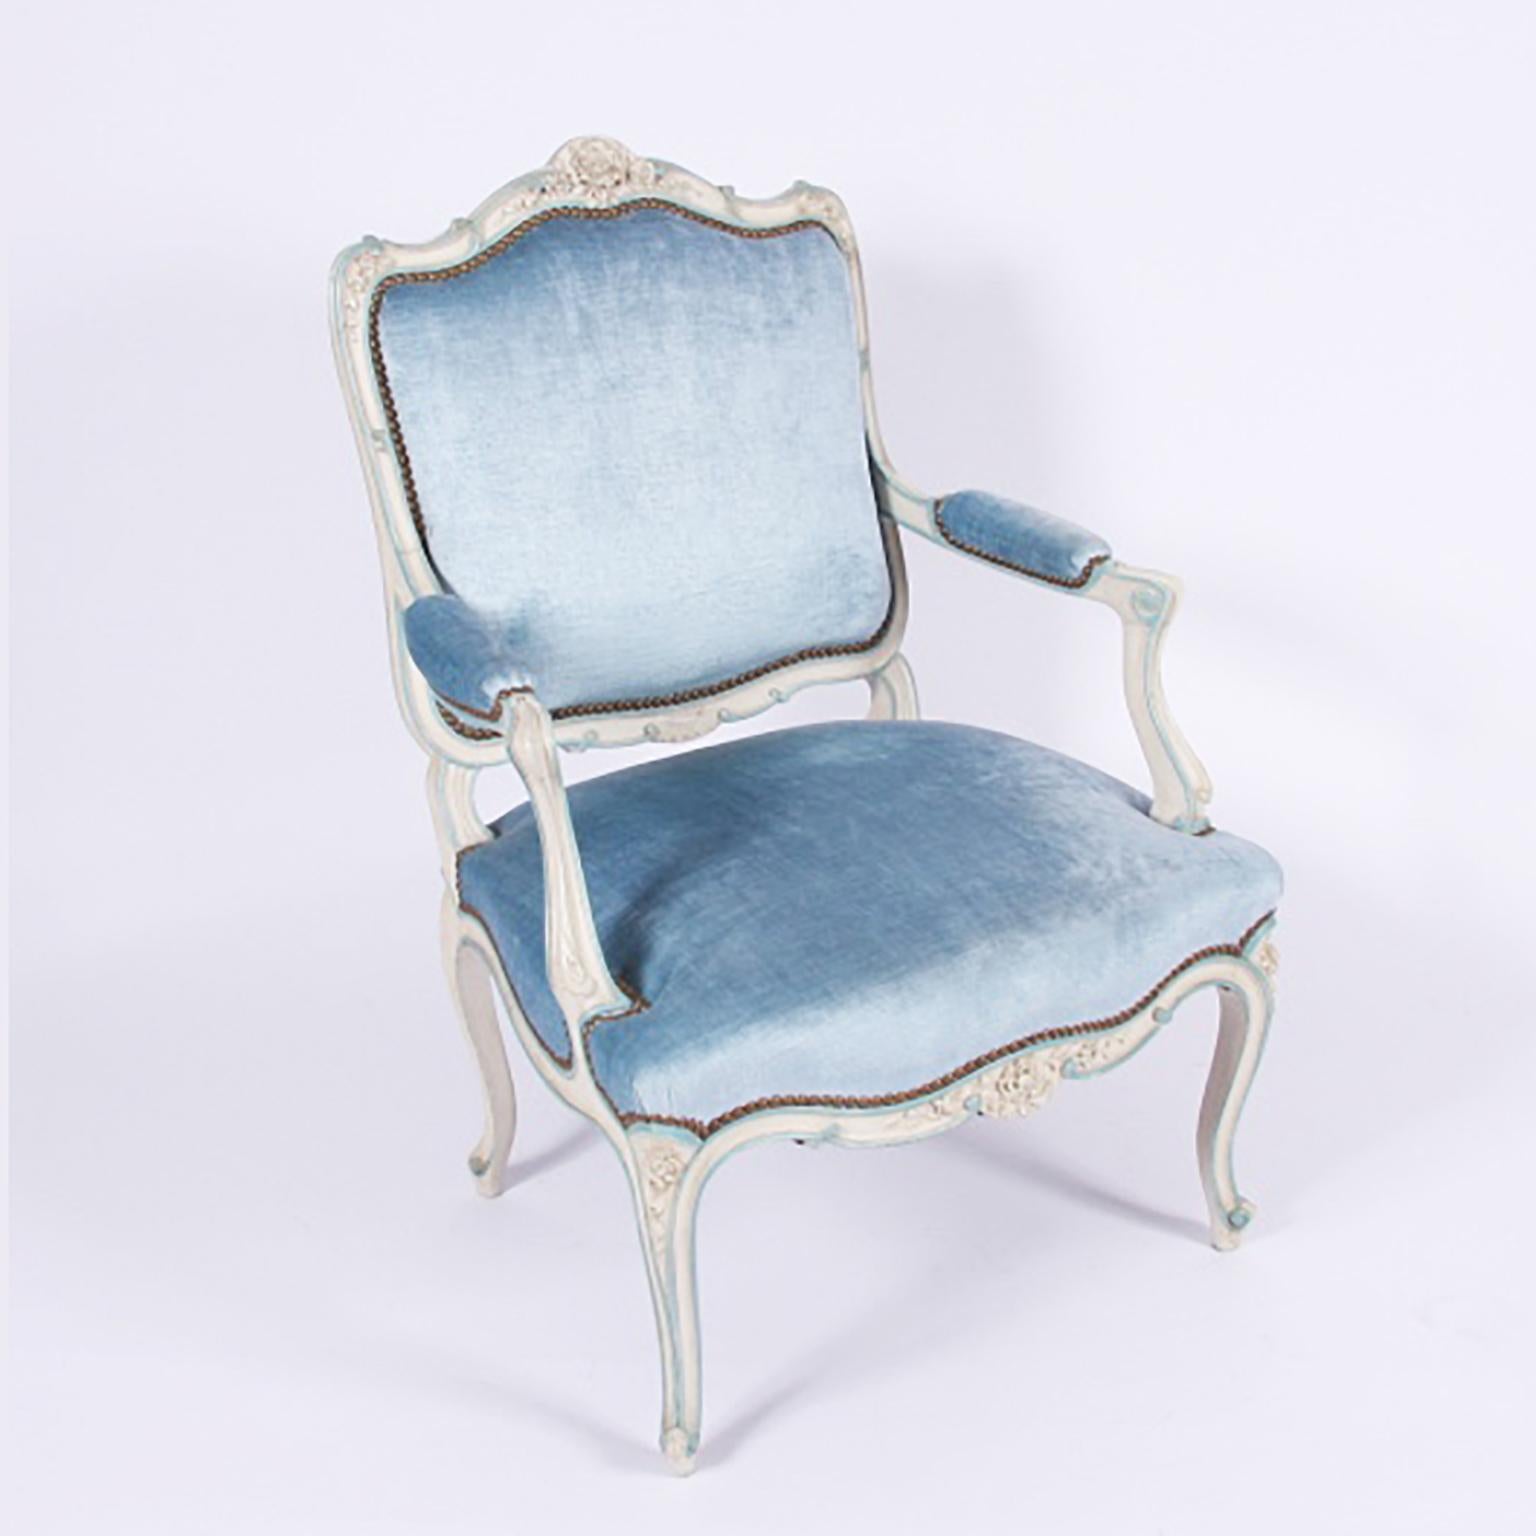 French, circa 1900.

A stunning salon chair, with baby blue velvet upholstery.